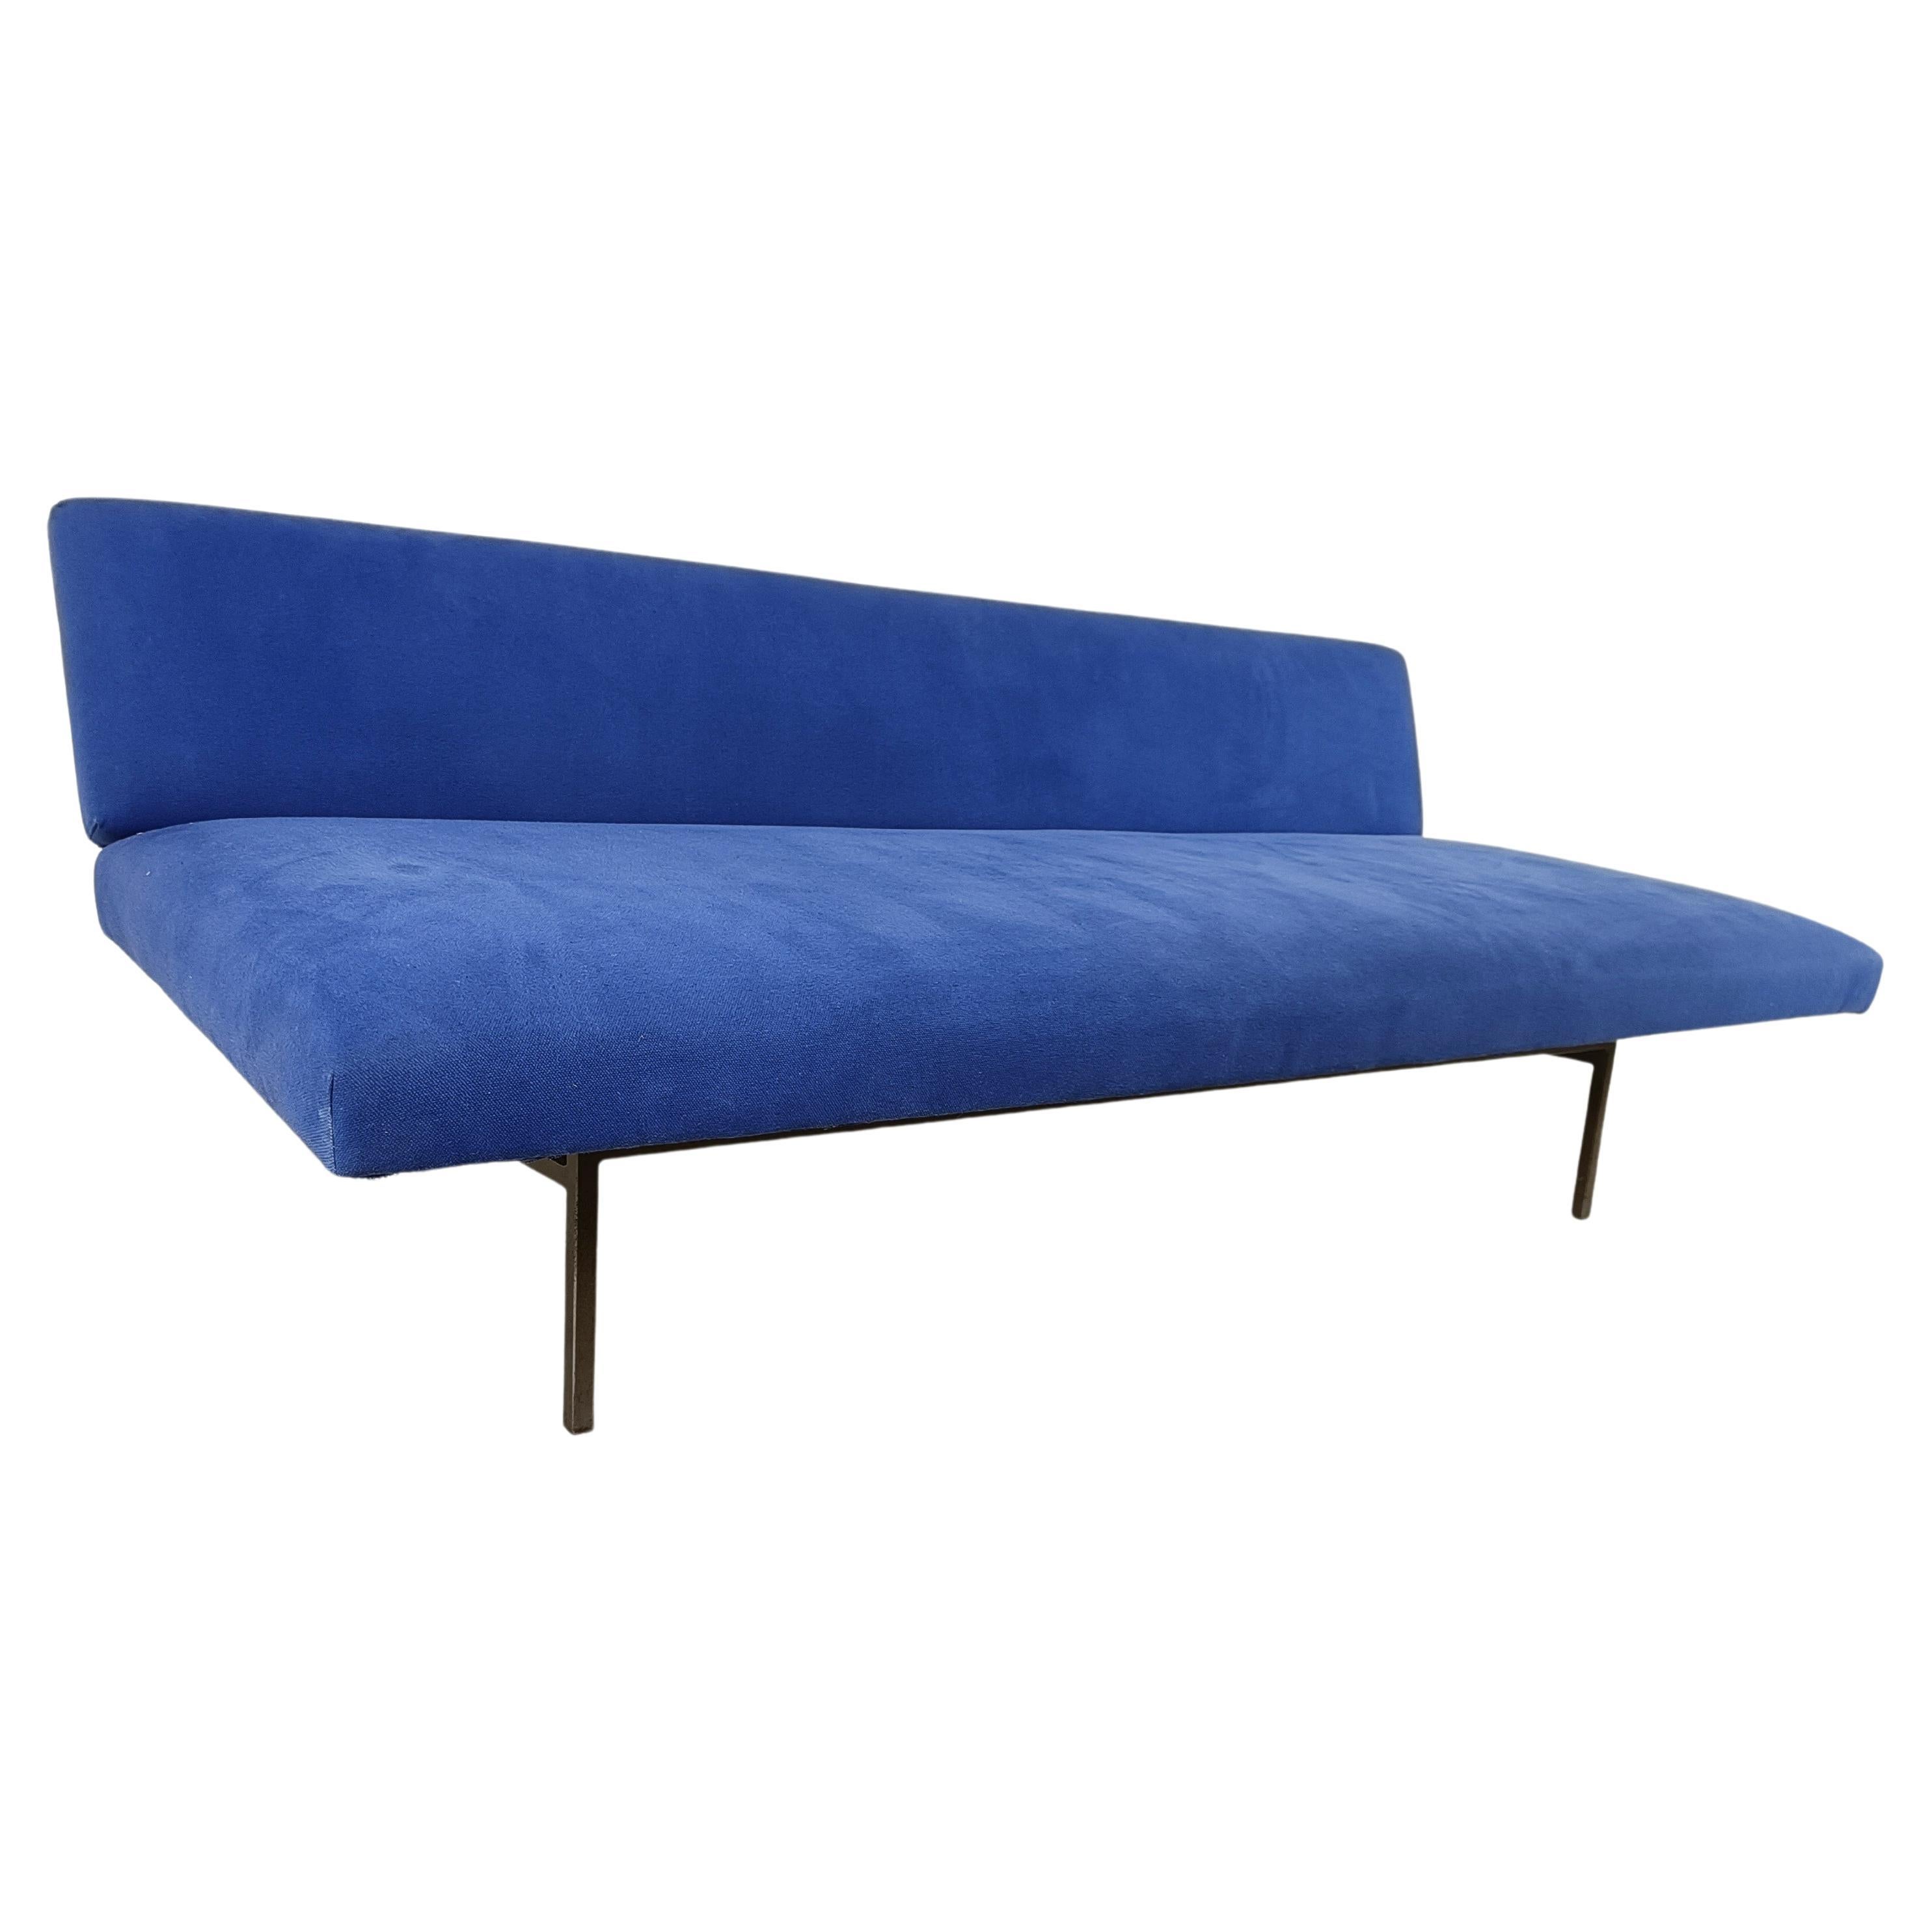 Modernist daybed by Rob Parry, 1960s